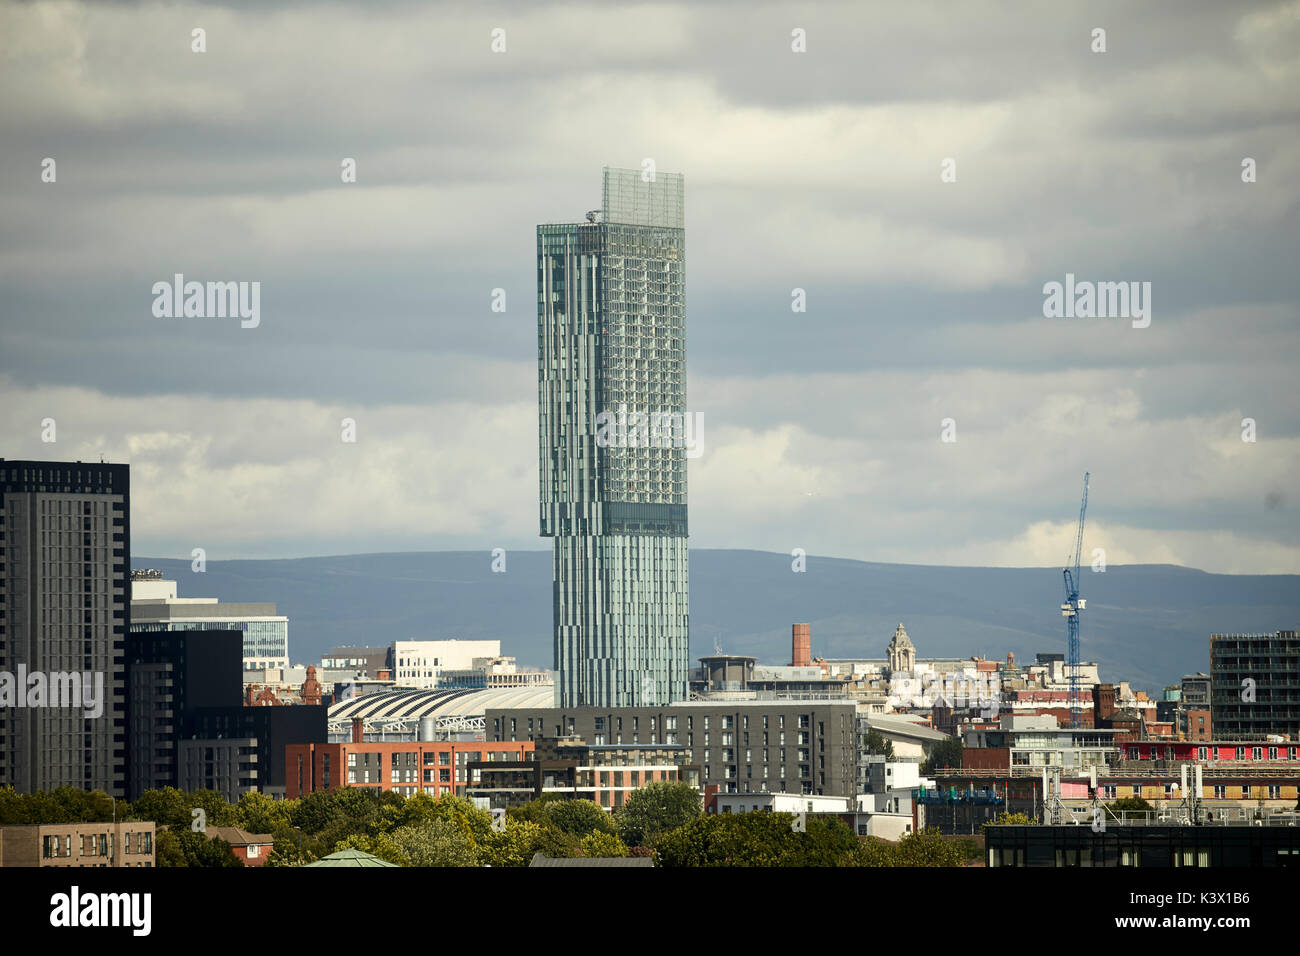 Manchester city centre skyline dominated by Beetham Tower Hilton hotel and luxury apartments and the Pennine hills behind Stock Photo